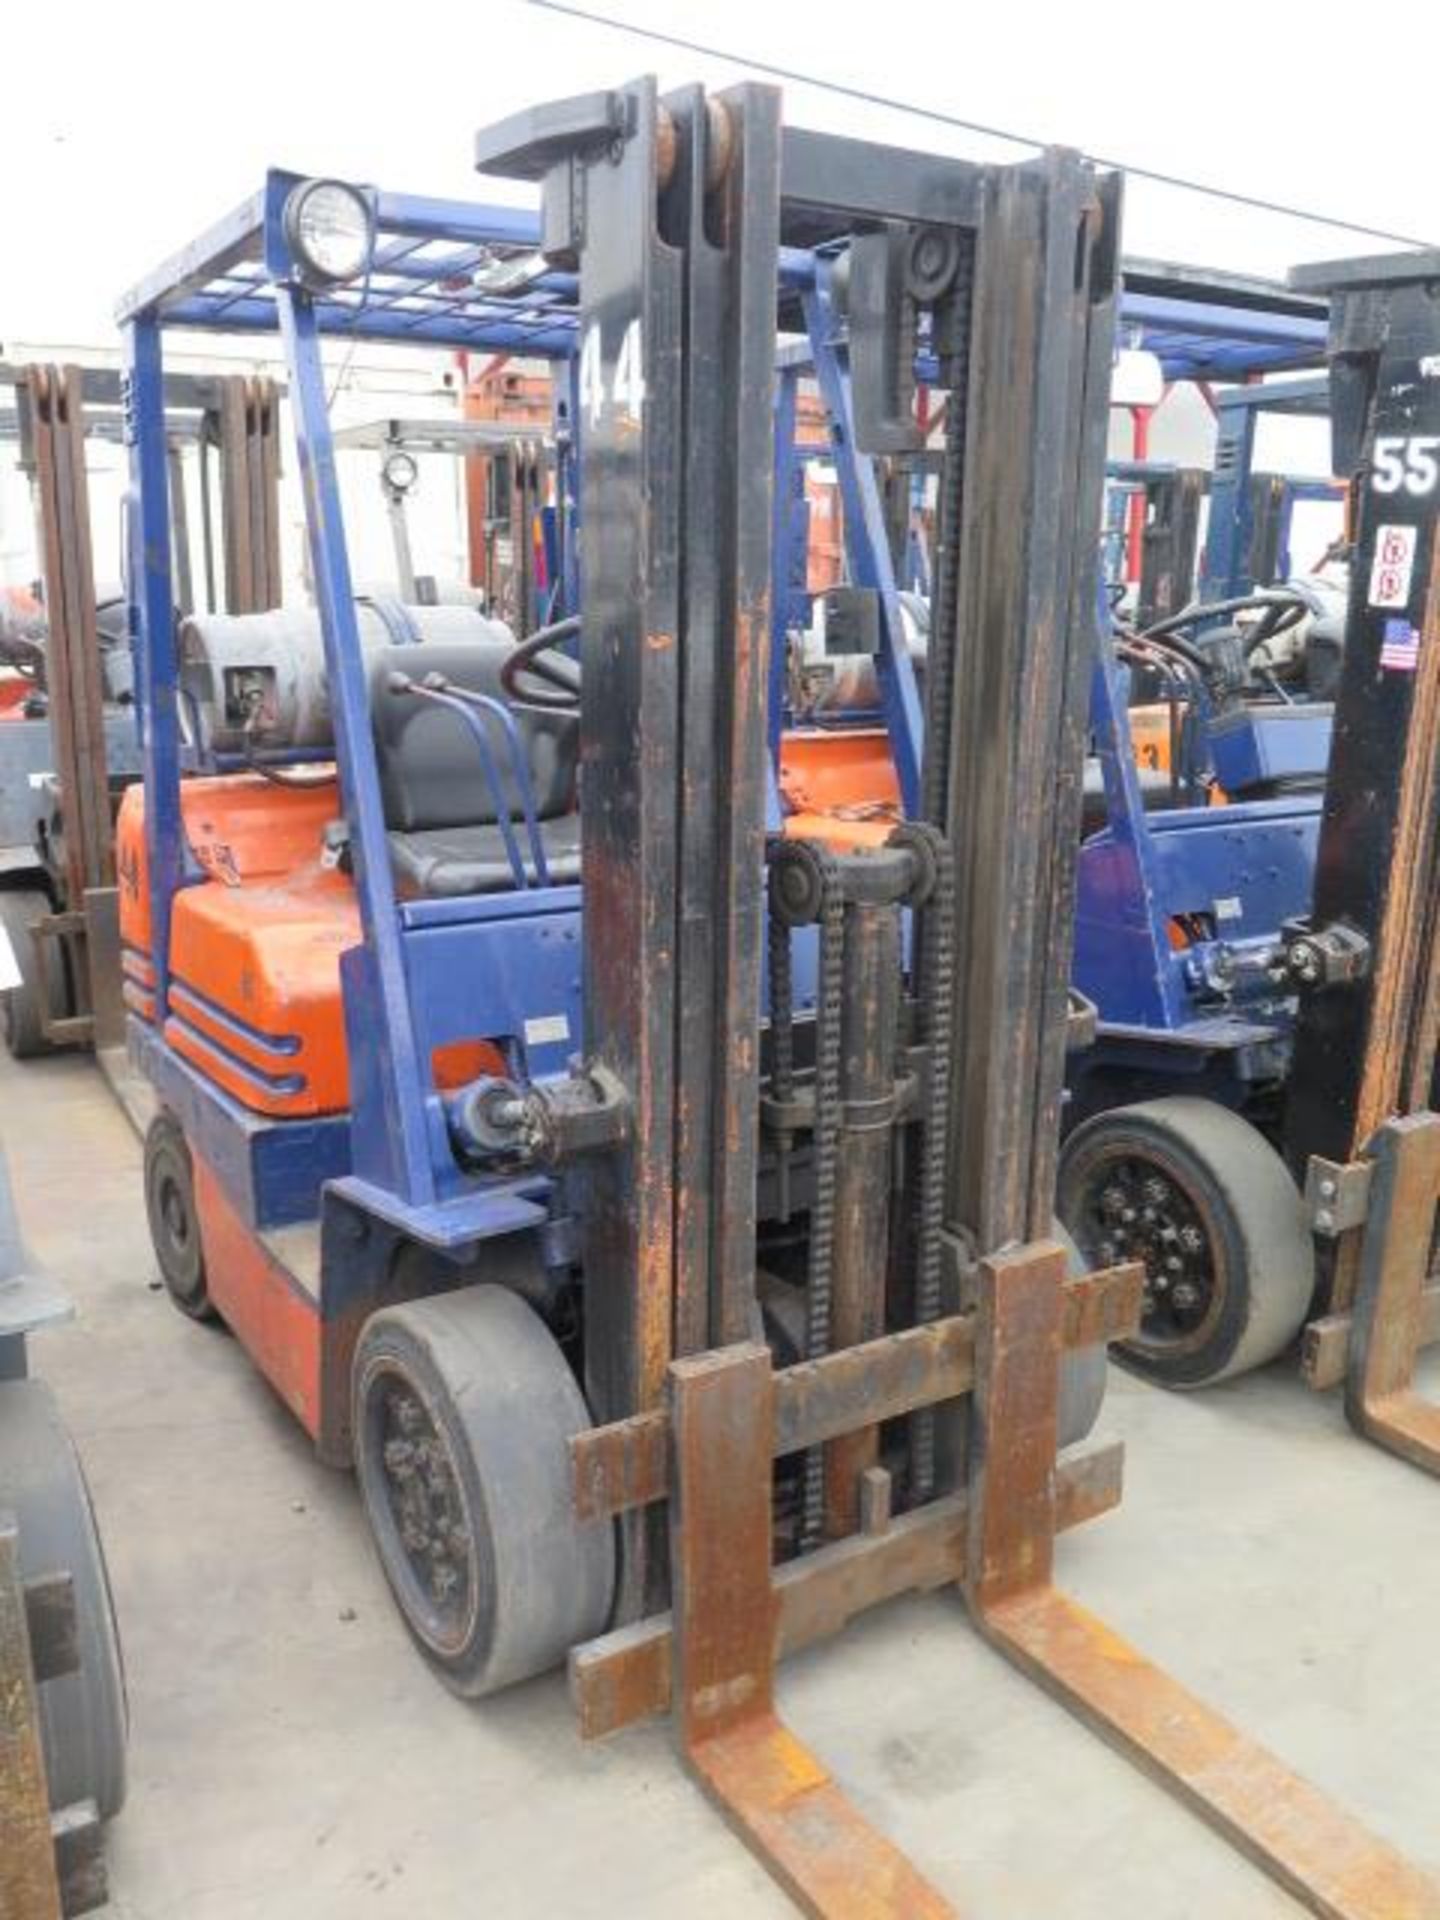 Toyota 5FGC25 5000 Lb Cap LPG Forklift s/n 85208 w/ 3-Stage Mast, 197" Lift Height, Cushion Tires, - Image 2 of 11